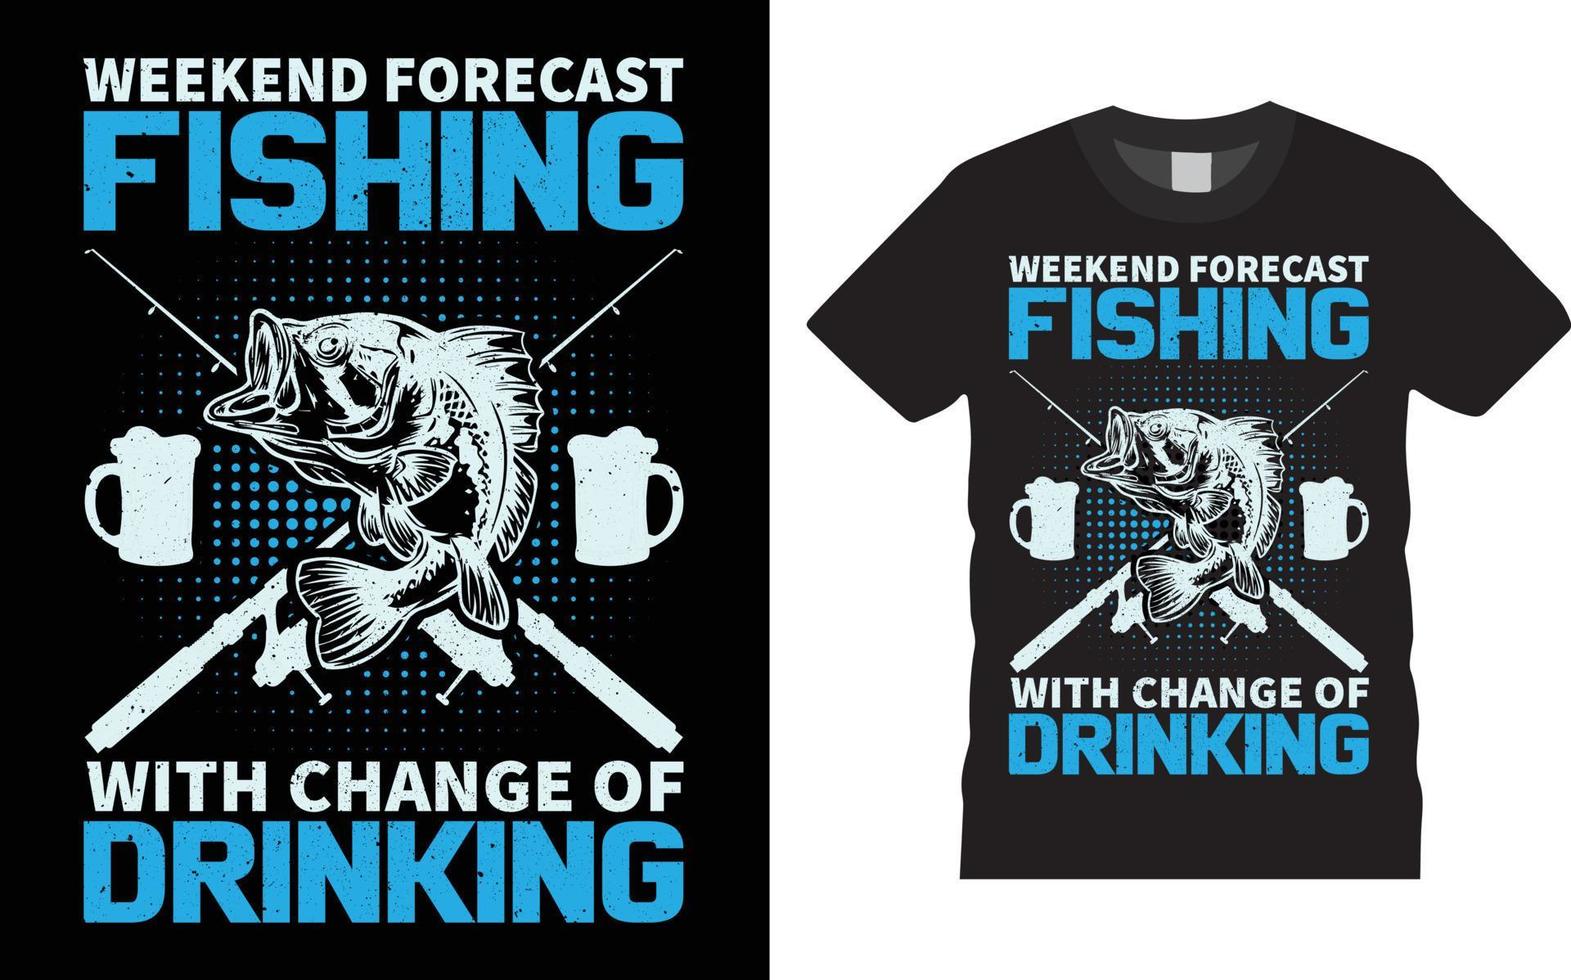 Weekend forecast fishing with a chance of drinking quote vector t shirt design template.